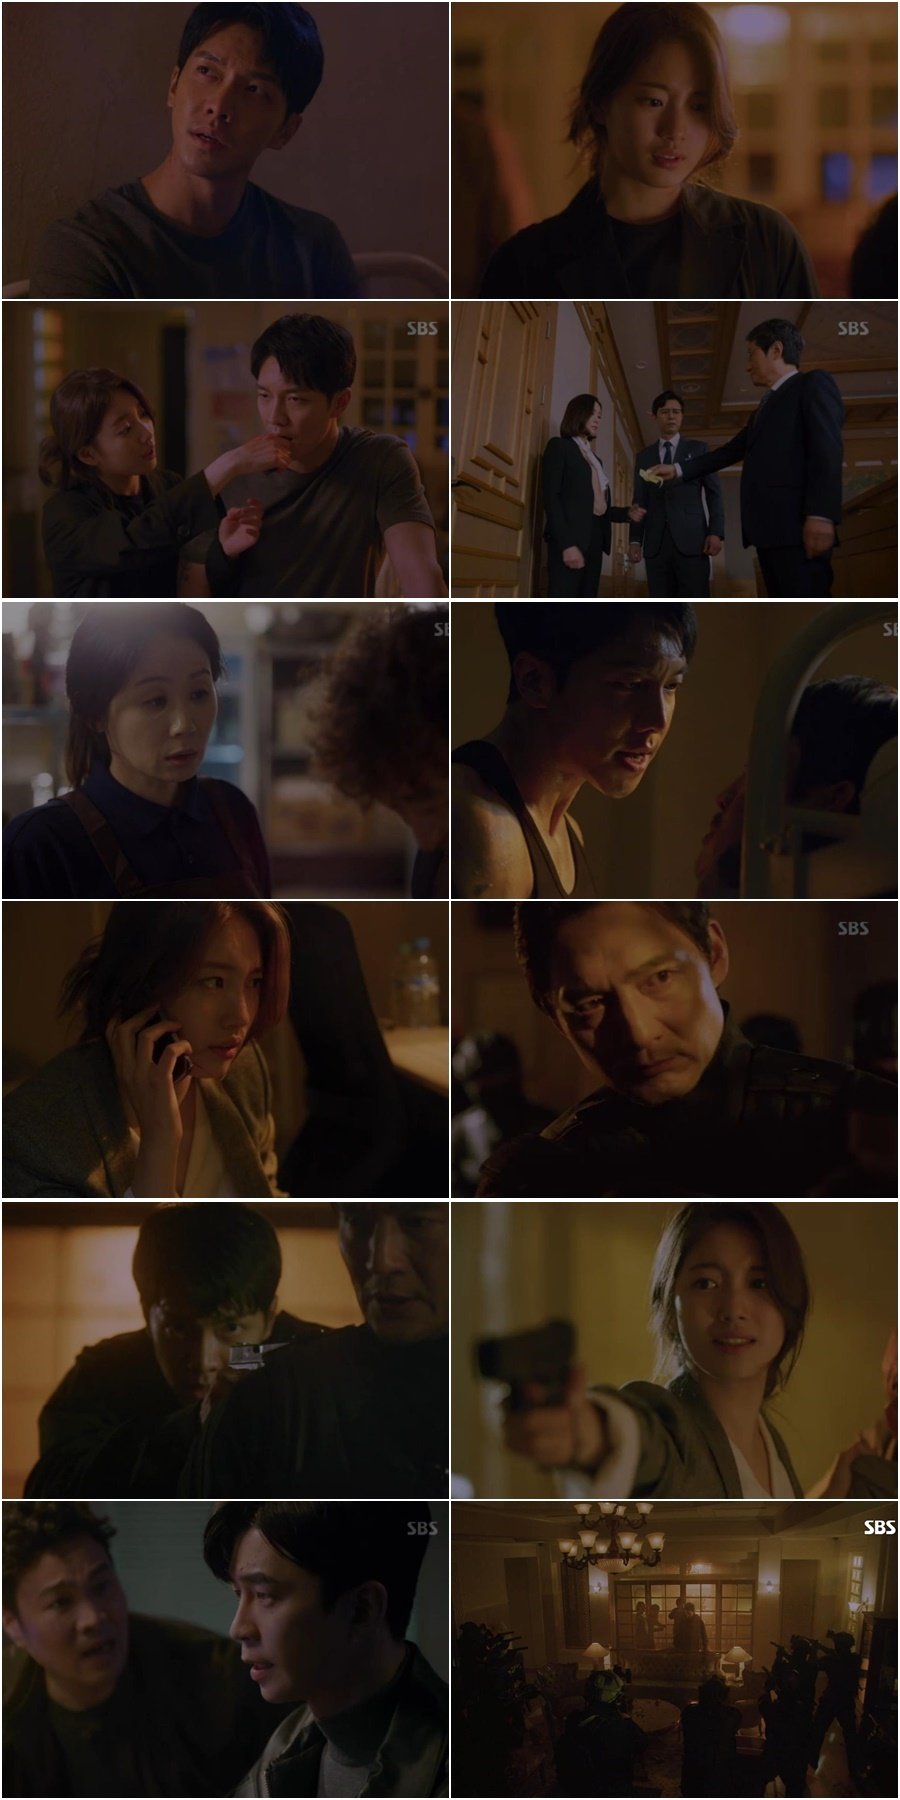 In the 9th episode of SBSs gilt drama Vagabond (VAGABOND), which aired on the 18th, Lee Seung-gi (Chadalgun) and Bae Suzy (Gohari) managed to escape the attack of the Assassination Group disguised as a support team and confronted them head-on.Shin Sung-rok (Ki Tae-woong) watched Lee Seung-gi and Bae Suzy fall into Danger situation.On the day of the show, Jung Man-sik (Min Jae-sik) recalled Lee Ki-young (Kang Ju-cheol) saying that he would send a support team to Morocco, and plans to overthrow the Assassination failure of the Ah-in Park (Lily) party to Moon Jeong-hee (Jesssica Lee) saying, Even if the mercenaries can not enter, the support team can enter. I suggested.Kim Min-jong (Yoon Han-ki) also said, Lets use Oh Sang-mi as a hidden card to overturn all the evidence.Moon Jin-hee visited Kyeong-heon Kang and oppressed the embroidery, saying, I can live with you. Kyeong-heon Kang (Oh Sang-mi), who felt threatened with life, eventually went to the police station and embroidered and turned the plate completely.Jung Man-sik then instructed Yoo Tae-woong (Hwang Pil-yong), a support team to dispatch to Morocco, to kill all the disturbed people, and operated the so-called Silk Road.And to arrest Lee Ki-young for transfer, he told Hwang Bo Ra (Republican) to interfere with the documents to frame Lee Ki-young. Hwang Bo Ra, who had already been informed by Lee Ki-young to cooperate with whatever he asked for, followed the words smoothly, I called the chicken.And Kim Sun-Young (the liner) who received the phone changed his face as soon as he heard the password name Vagabond and ordered Yang Hyung-wook (the liner) to deliver it.At that time, Yoo Tae-woong and his party came into the Morocco Embassy, and Lee Seung-gi and Bae Suzy wondered that Ah-in Park and the party did not attack Yoo Tae-woong.Shin Sung-rok also noticed that they were not Lee Ki-young lines, and Kim Sun-Young gave a decisive tip that Assassination group, not support team.Kim Jong-soo (Ahn Ki-dong) also told Shin Sung-rok, They went to kill Song Yuqi and Cha Dal-gun, adding, You can live by working with Hwang.At this time, Lee Seung-gi went to the room to look at the dynamics of Yoo Tae-woong, who gave a suspicious impression, and Bae Suzy, who hurriedly blocked Lee Seung-gi, found that Yoo Tae-woong and his team members were attaching a silencer to the pistol while Yoo Tae-woong opened the door.Lee Seung-gi told Bae Suzy to take Jang Hyuk-jin (Kim Song Yuqi) to Shin Sung-rok and then knocked again, and Yoo Tae-woong fired a bullet at that moment.Lee Seung-gi, who was hiding behind the door, hit Yoo Tae-woong and fought fiercely.Lee Seung-gi took Yoo Tae-woong hostage after quickly picking up a fallen pistol, and at the same time Bae Suzy received a call from Ryu Won (Mickey) saying, Type a mobile phone timer and avoid it to a safe zone.When Yoo Tae-woong instructed his subordinate to shoot a car gun, Bae Suzy appeared and said, What the hell are you doing?Shin Sung-rok was shocked by the fact that he was just a person who follows the instructions even in the urgent shout of Shin Seung-hwan (Kim Se-hoon) while watching Lee Seung-gi and Bae Suzy surrounded by Yoo Tae-woongs corps through CCTV.Shin Sung-rok wondered if he would be the main character of another unexpected shock reversal.